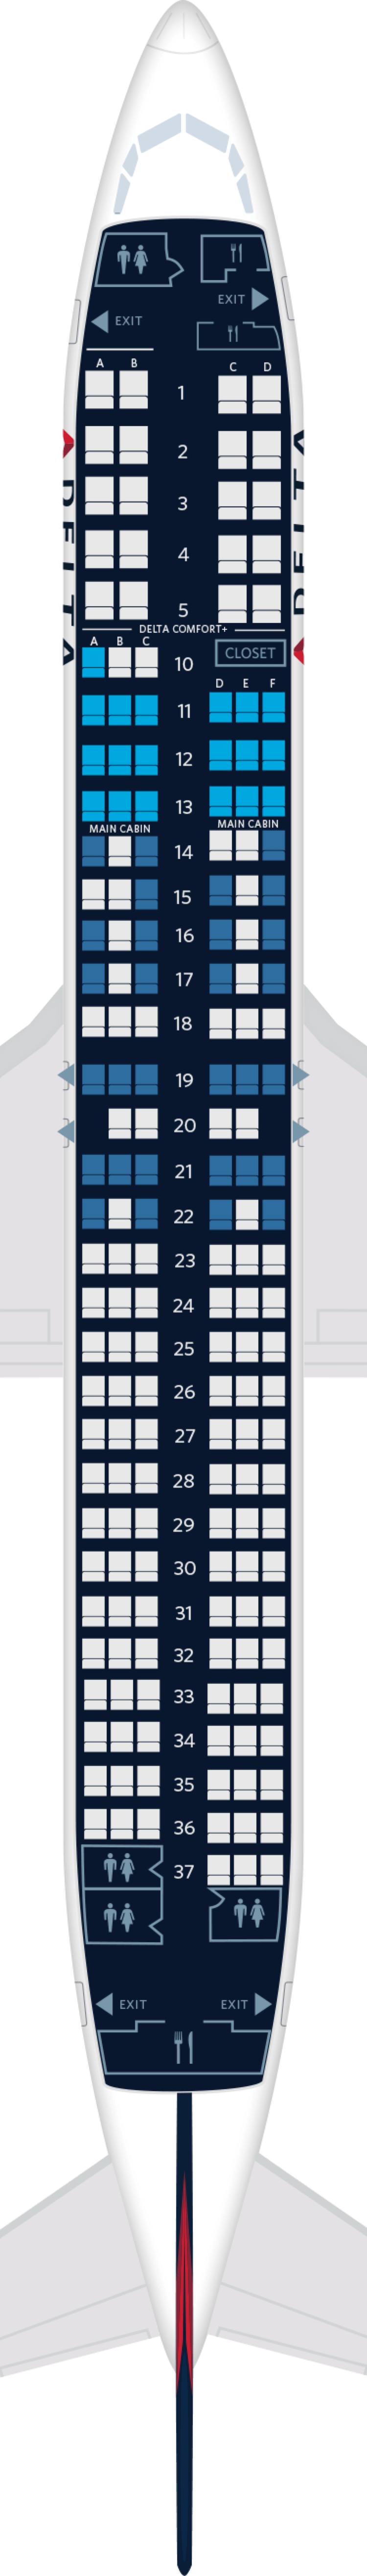 delta airlines seat assignments